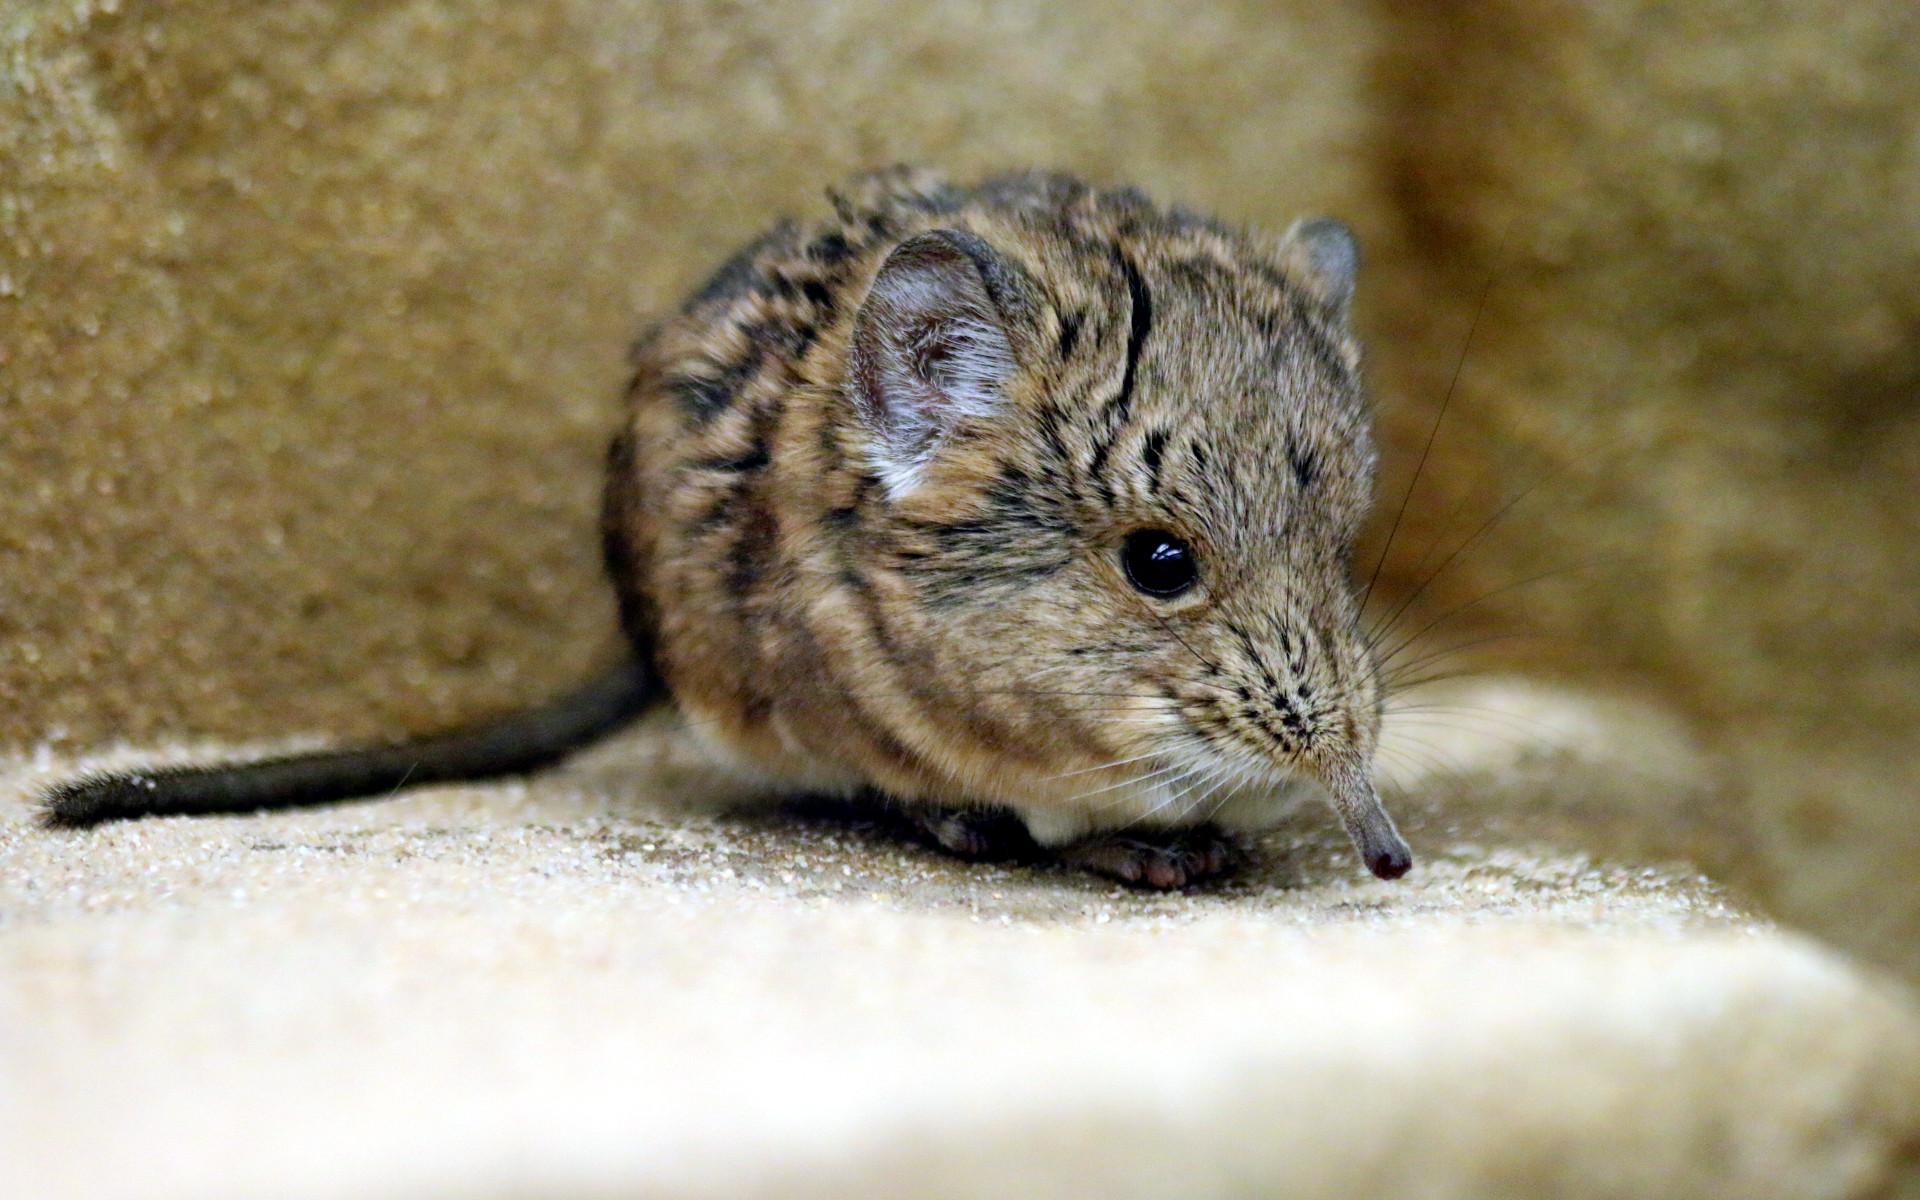 Facts About Elephant Shrew: Food, Environment, and Life